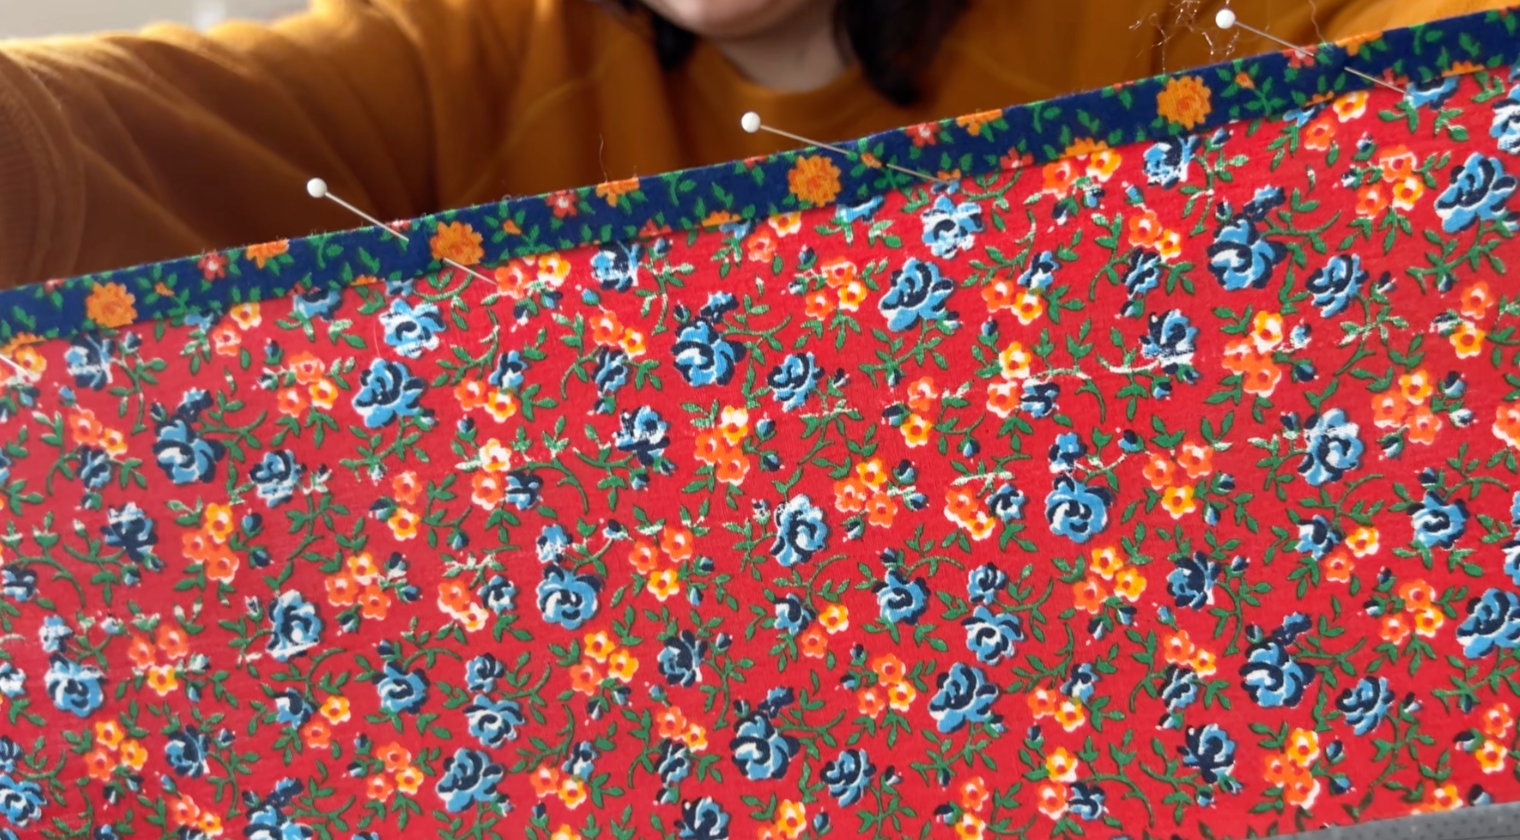 A blue strip made with the bias tape maker pinned to the top of a piece of red floral fabric